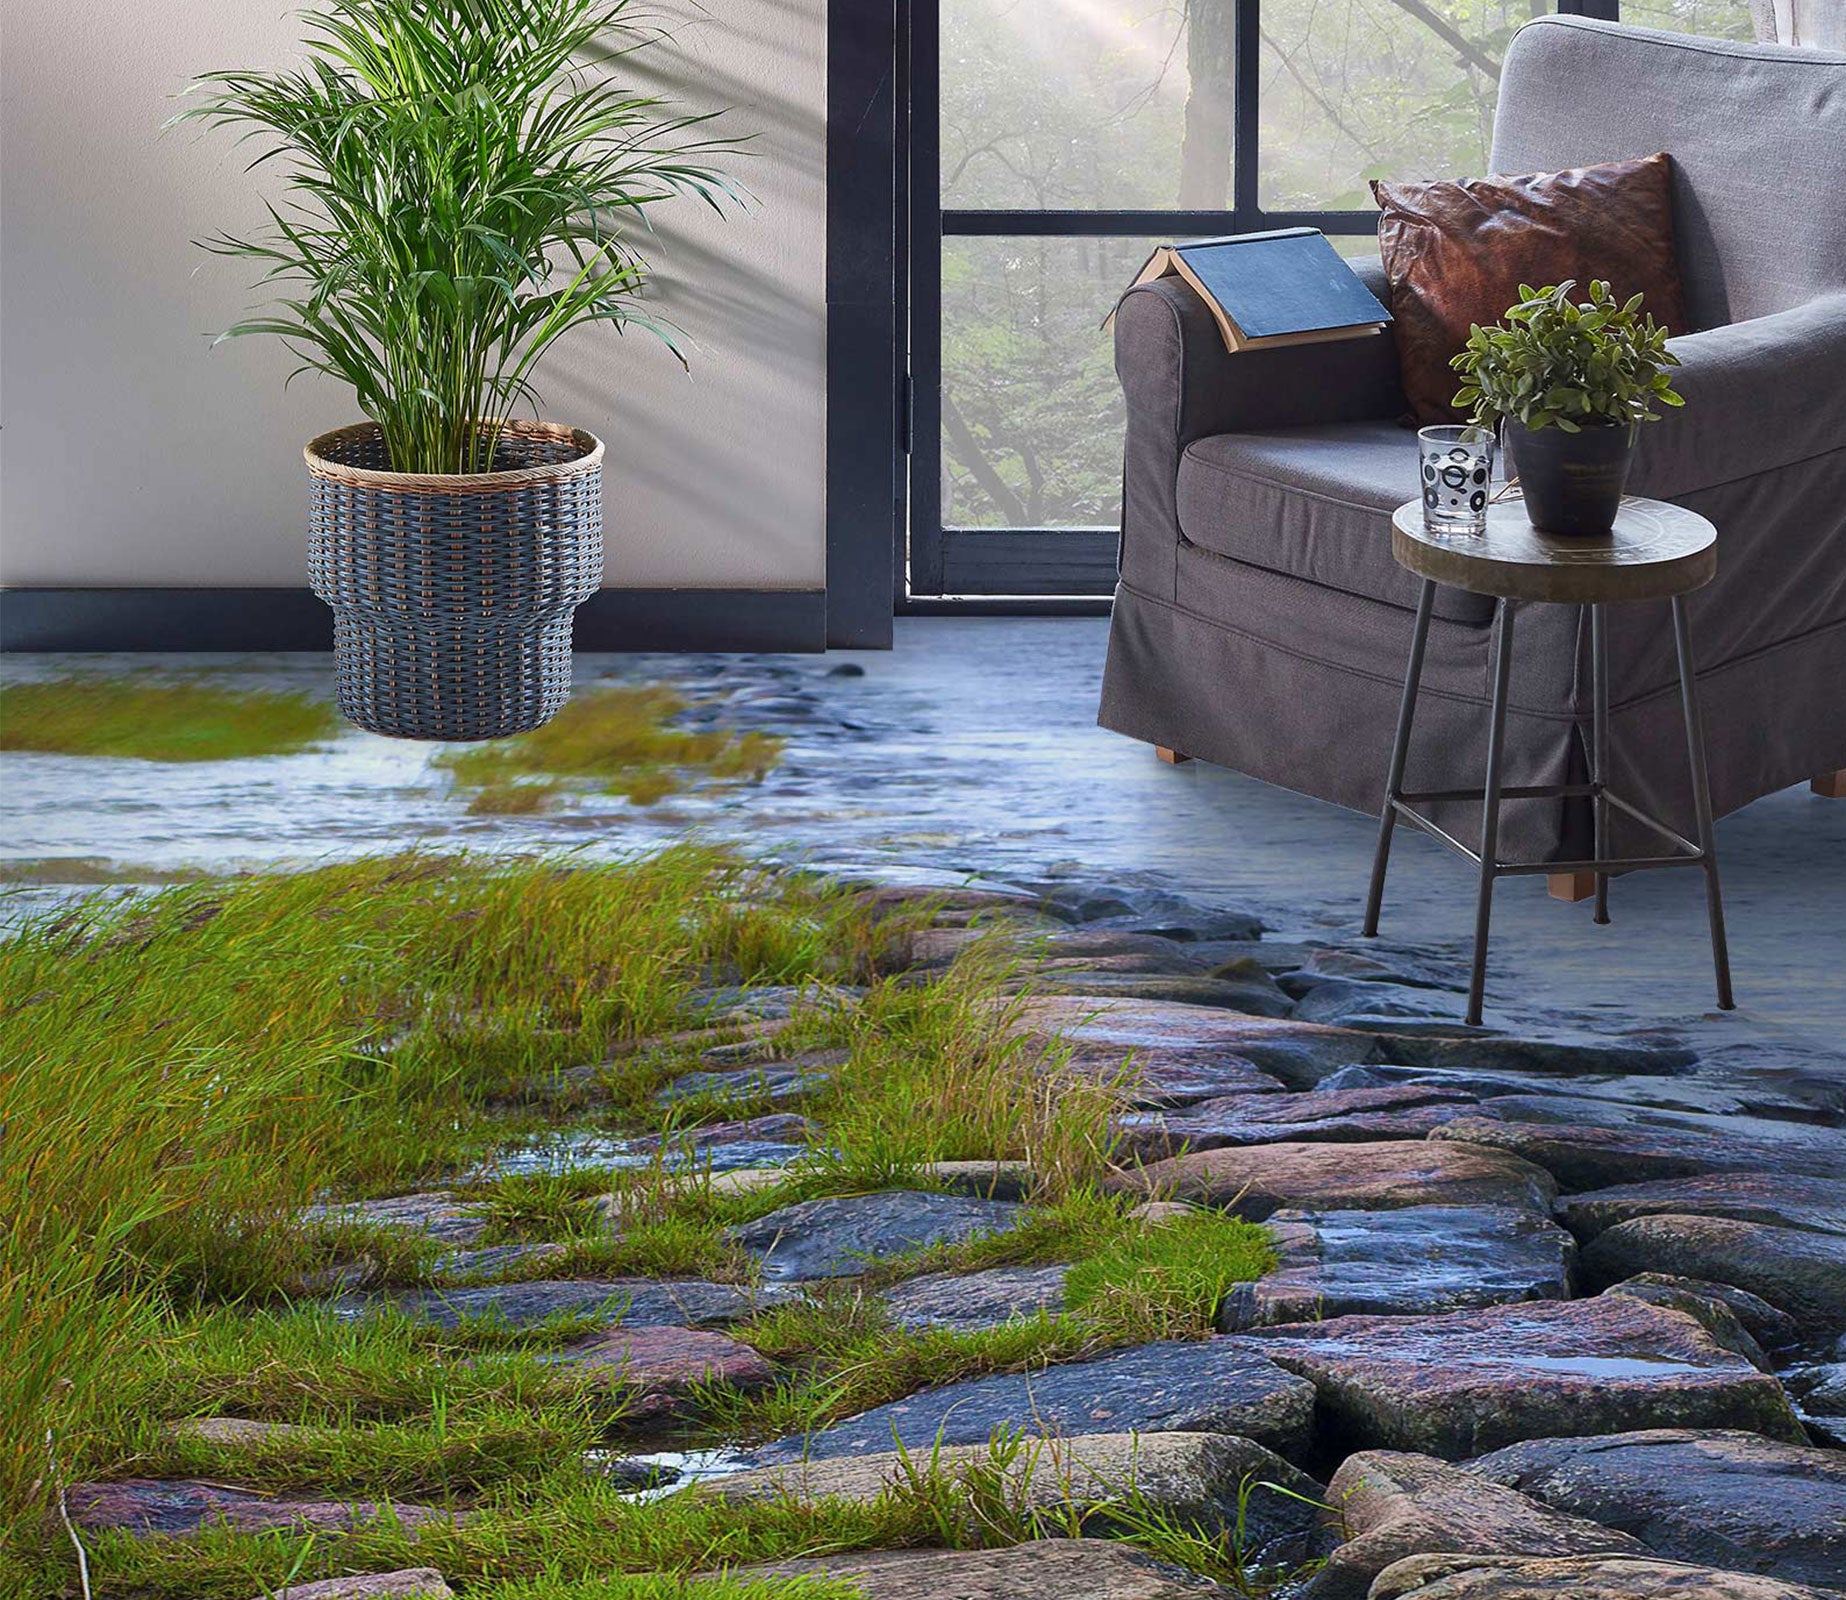 3D Grass Among The Stones 1099 Floor Mural  Wallpaper Murals Self-Adhesive Removable Print Epoxy